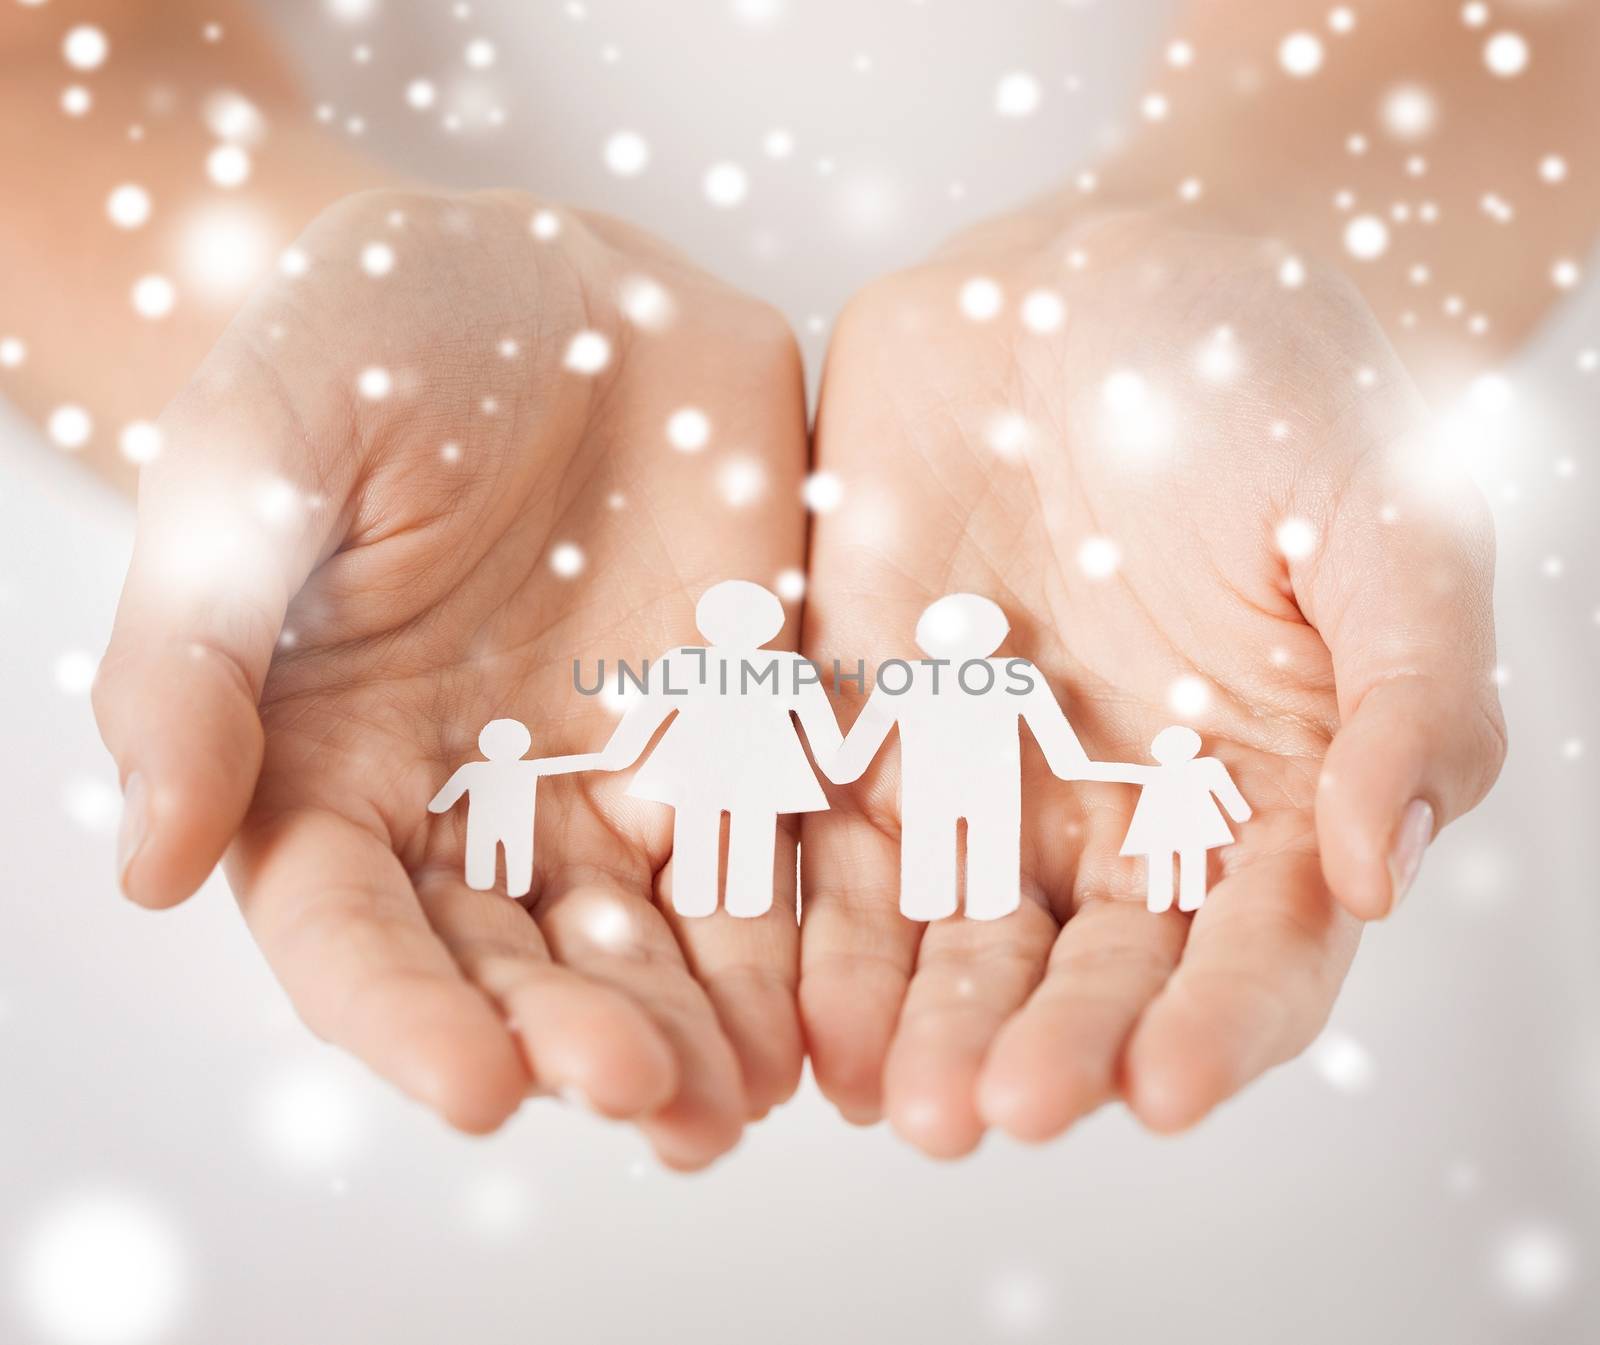 family, children, christmas, x-mas and happy people concept - woman cupped hands showing paper man family